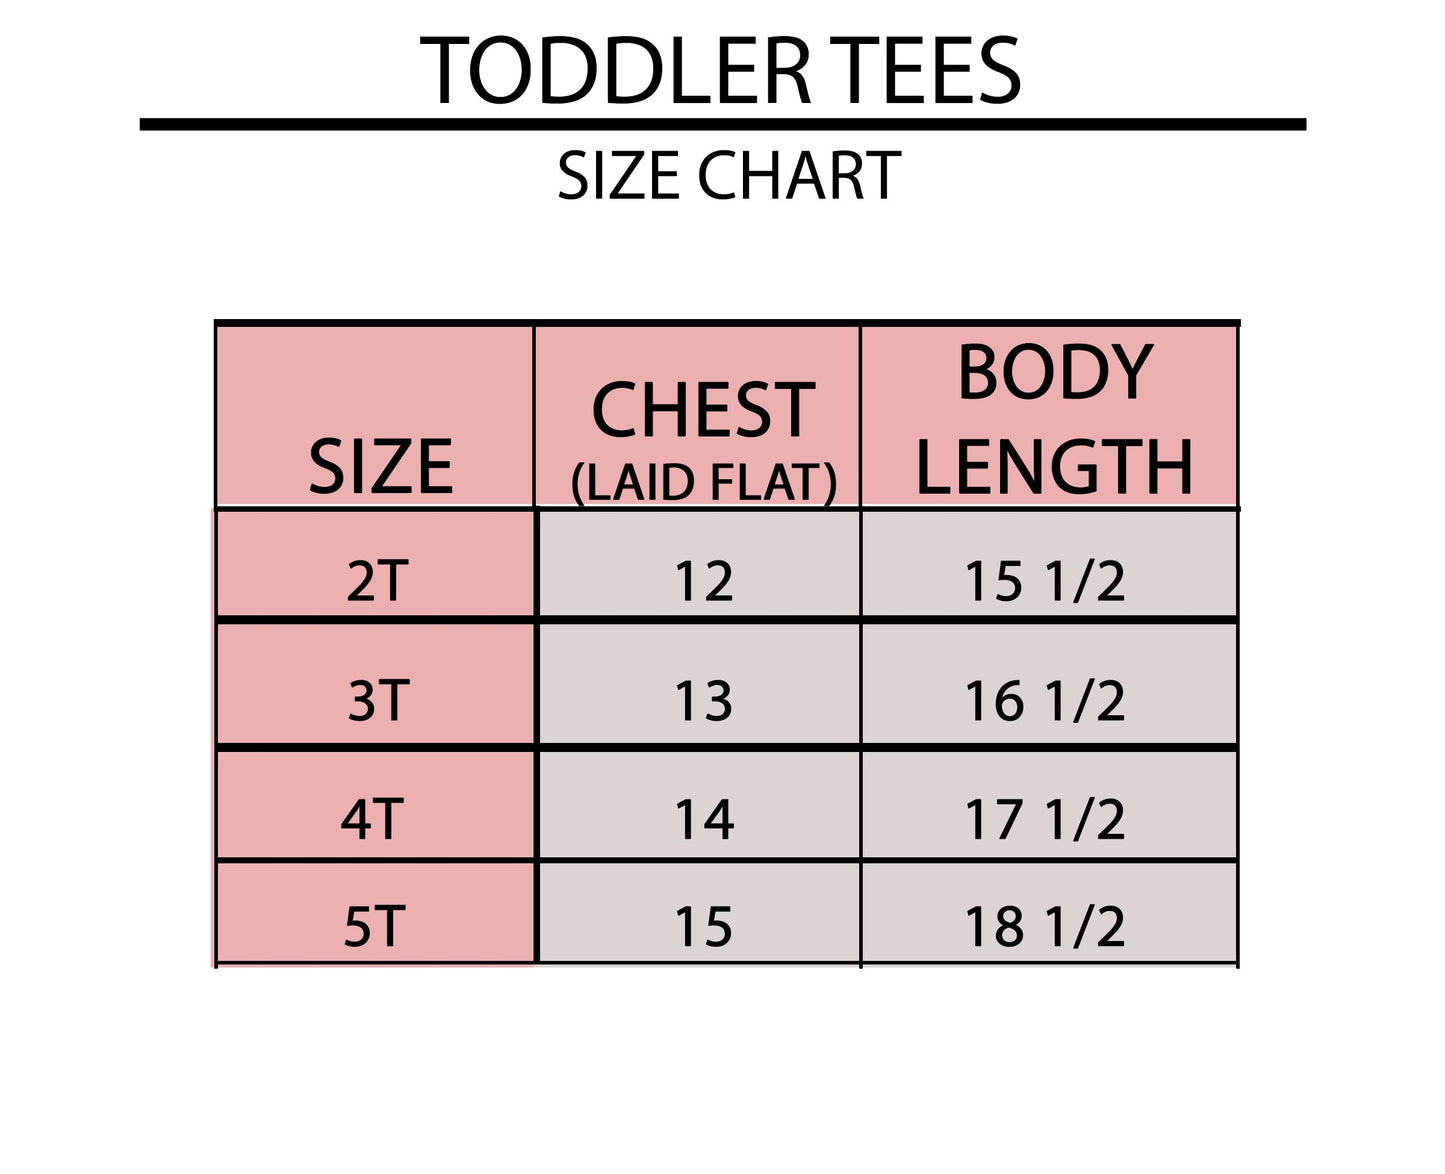 Trouble So Cute | Toddler Short Sleeve Crew Neck